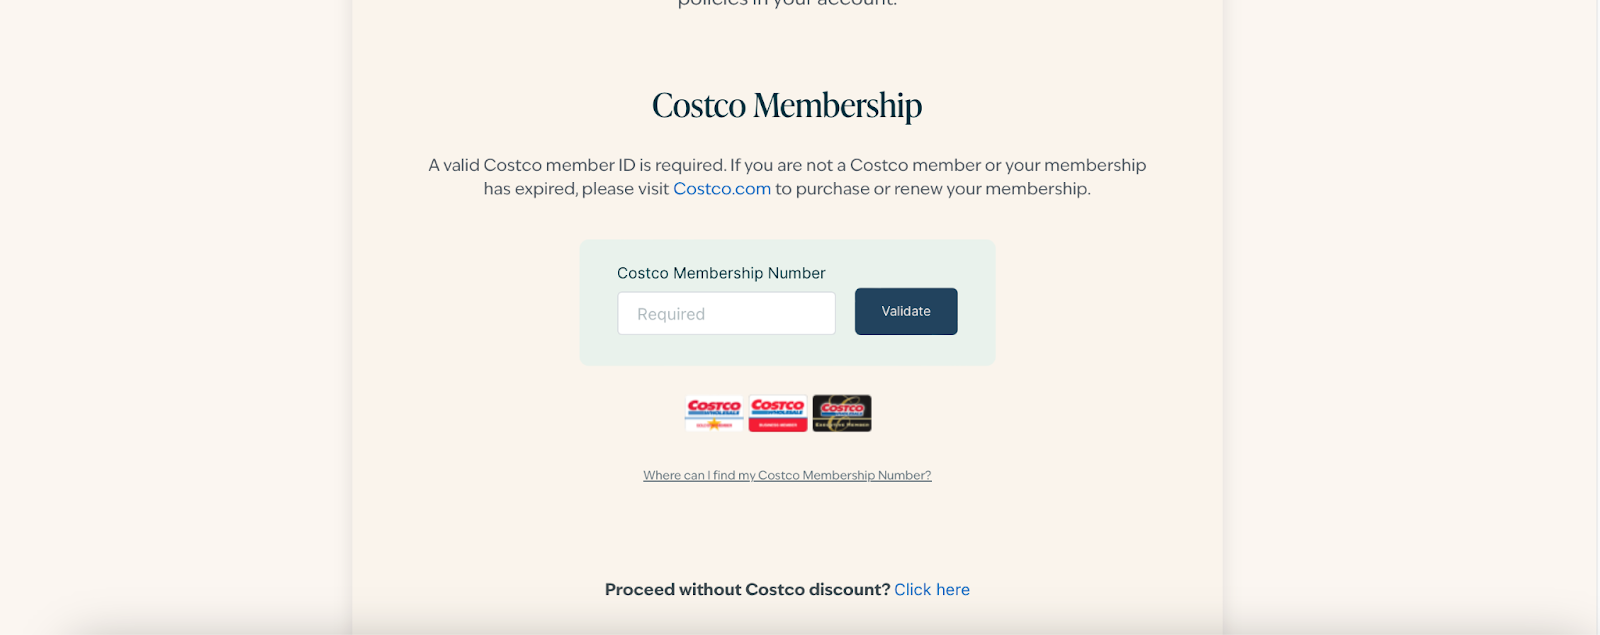 Prompt to input Costco membership number